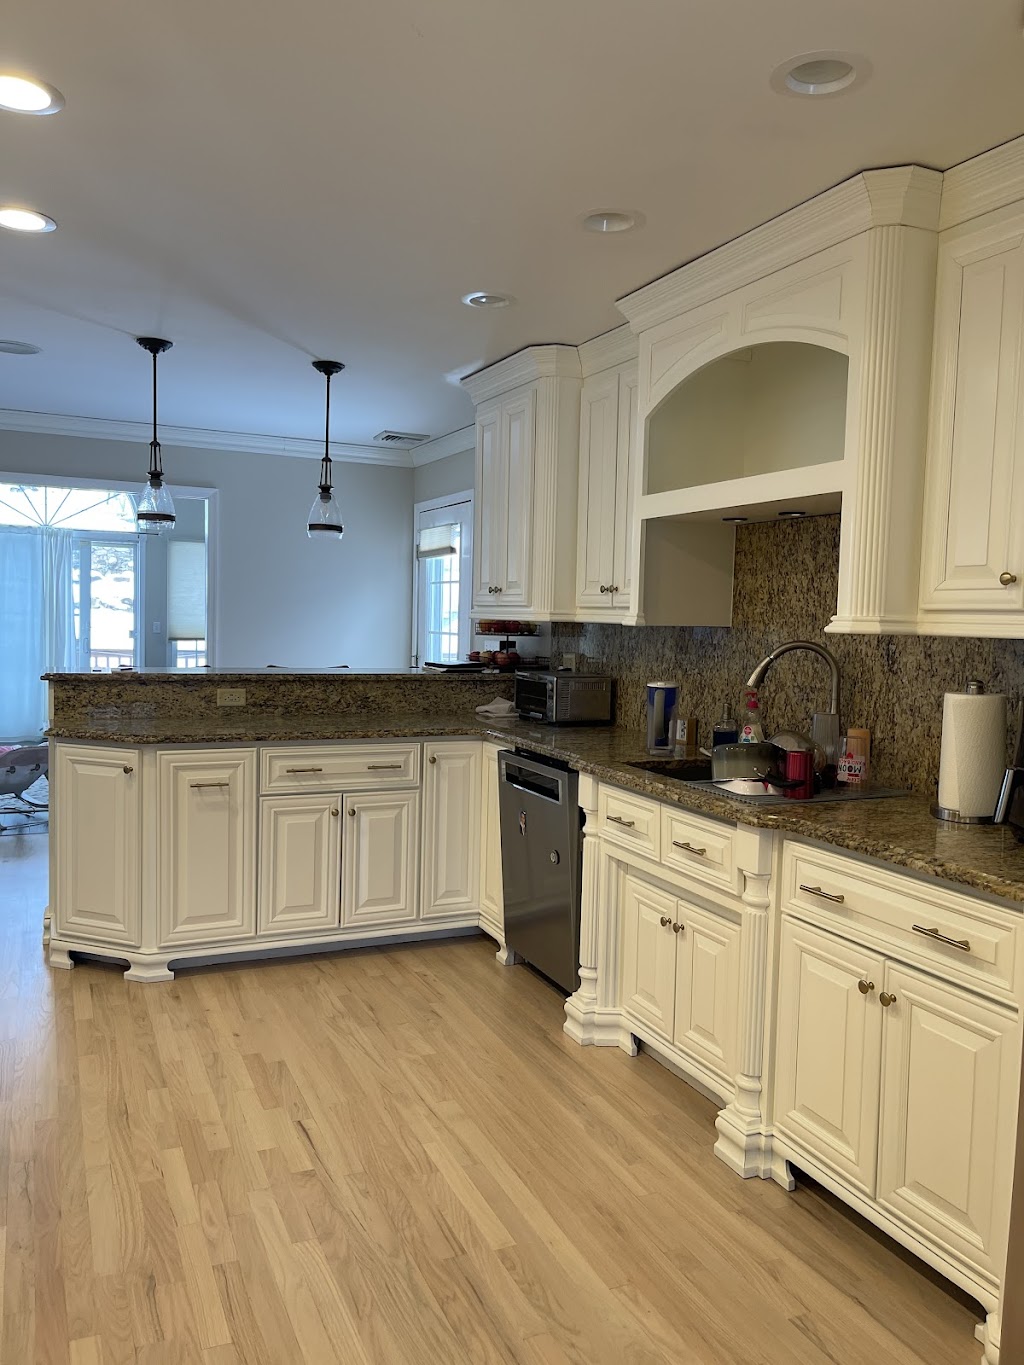 Paint Plus Home Remodeling | 65 W Central Ave, Wharton, NJ 07885 | Phone: (973) 876-7806